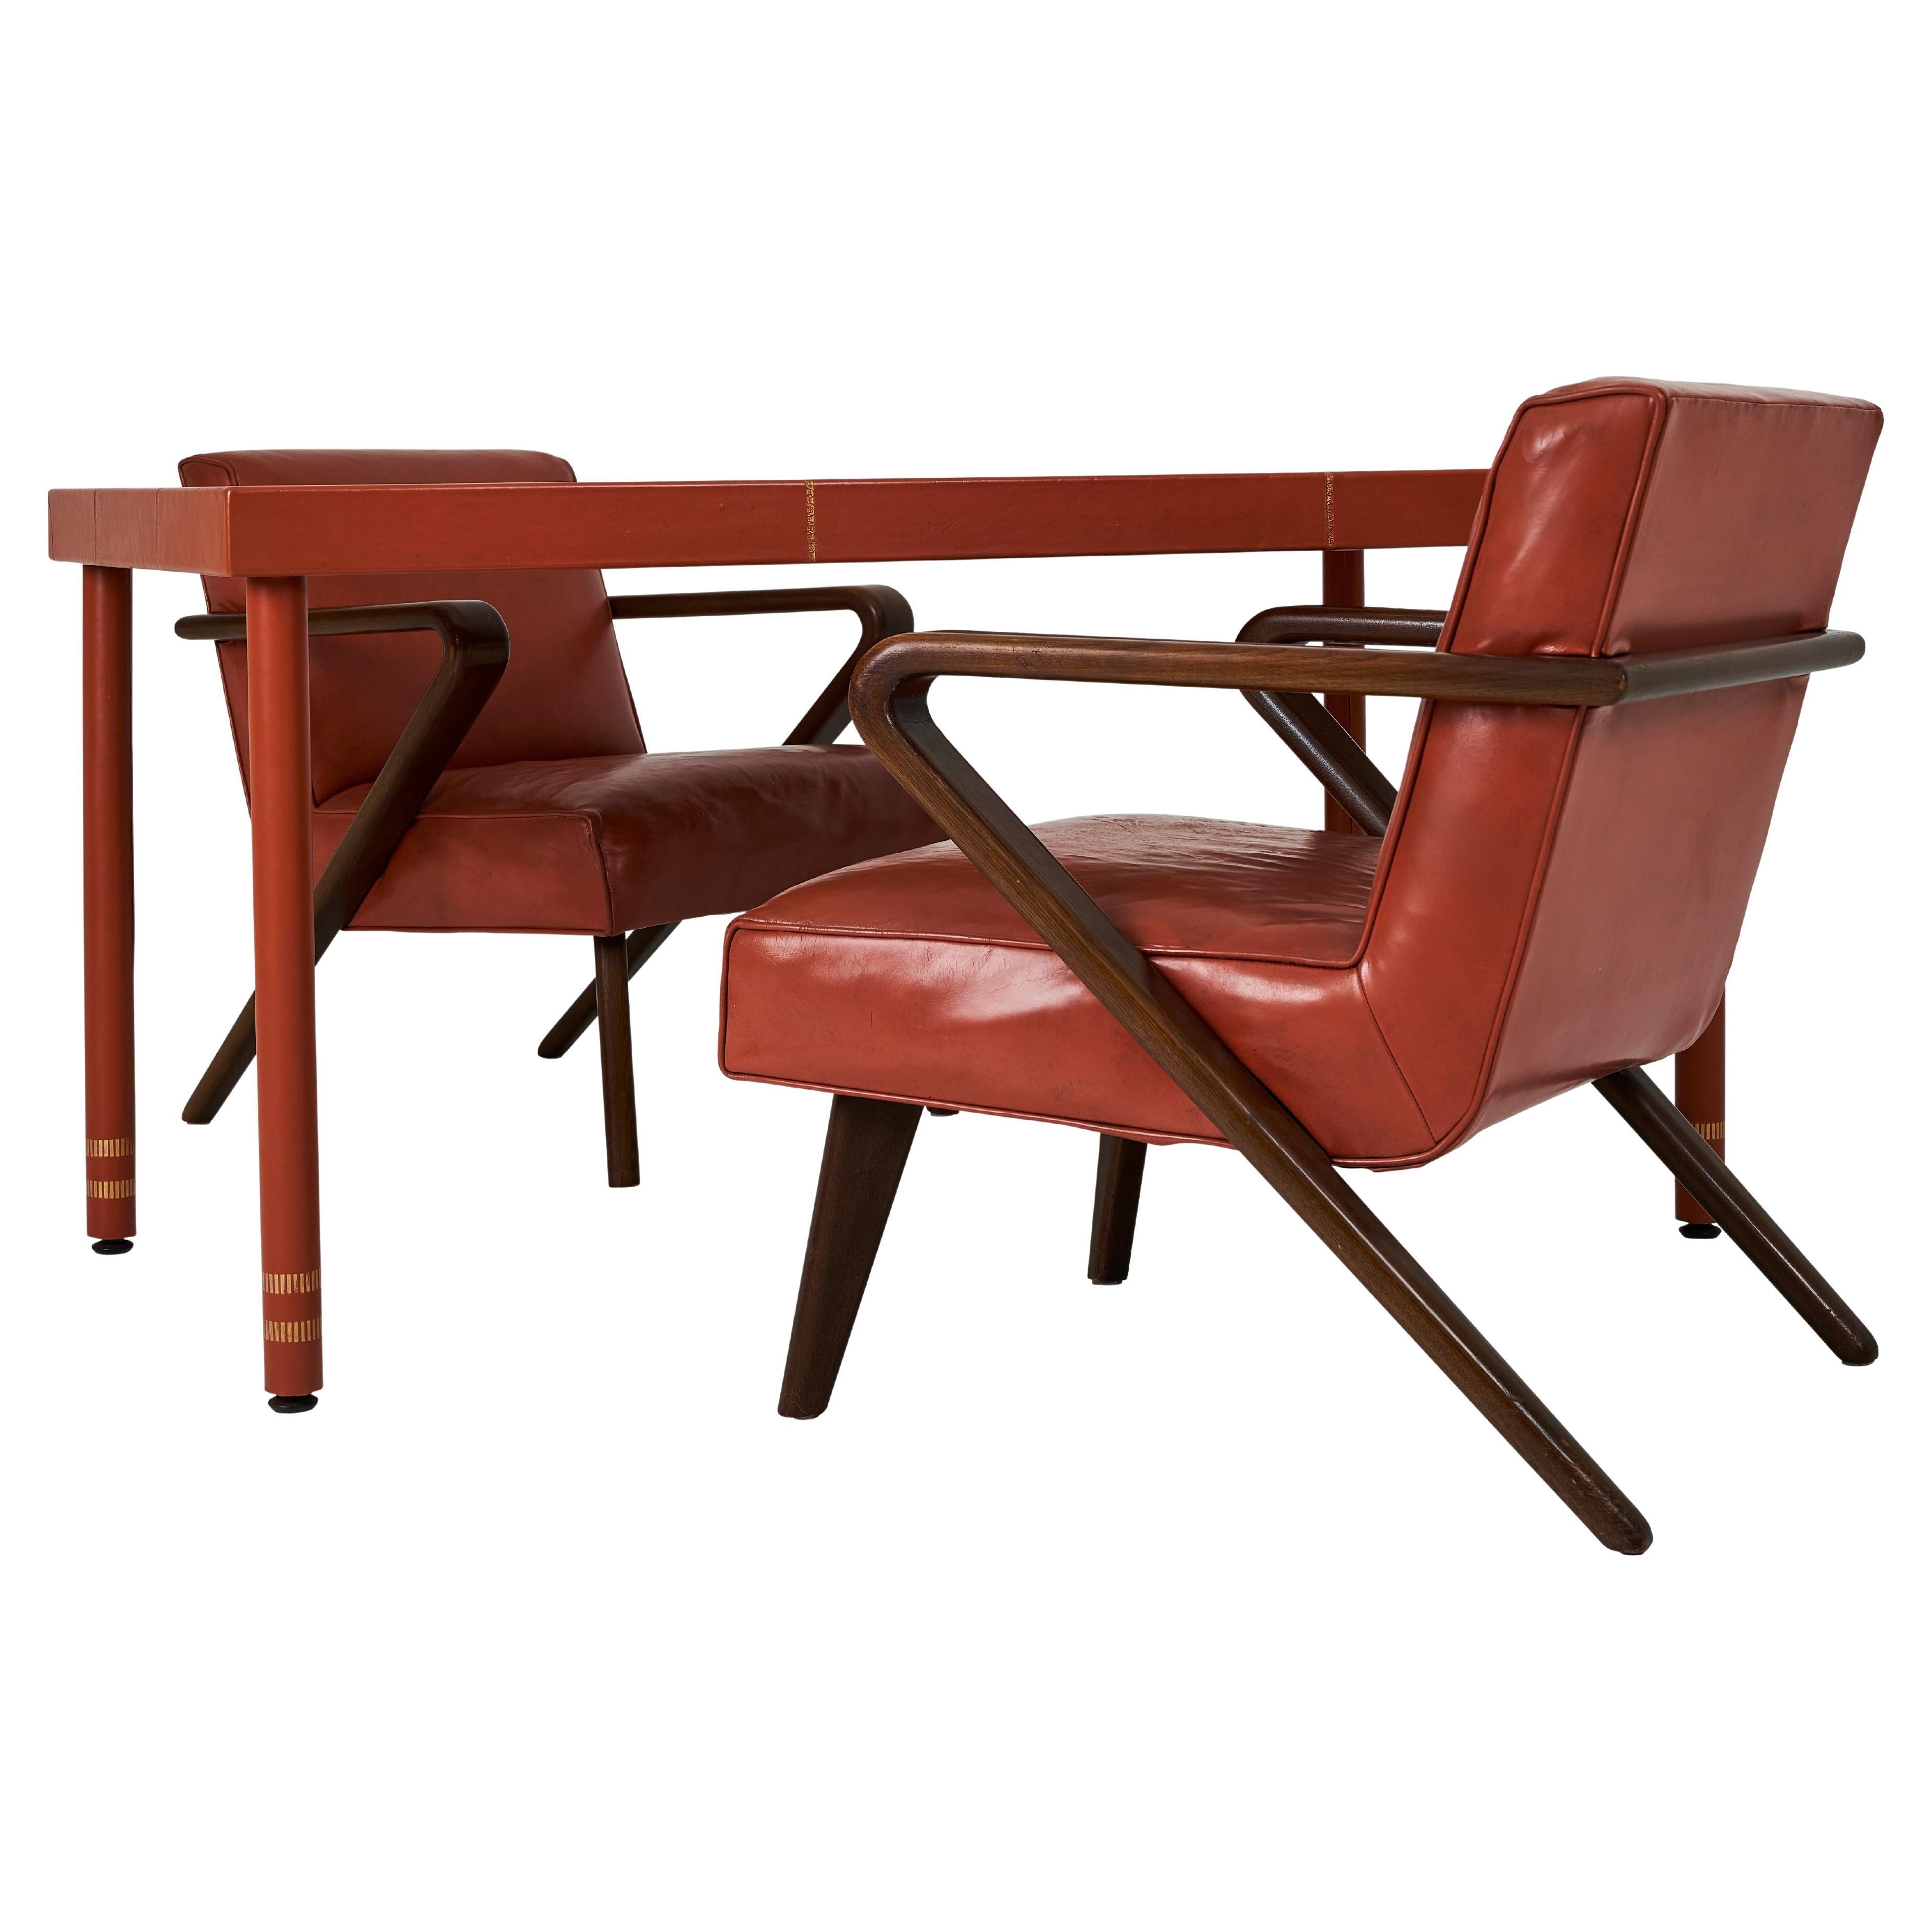 A Leather Wrapped Desk and Matching Arm Chairs designed by William Haines